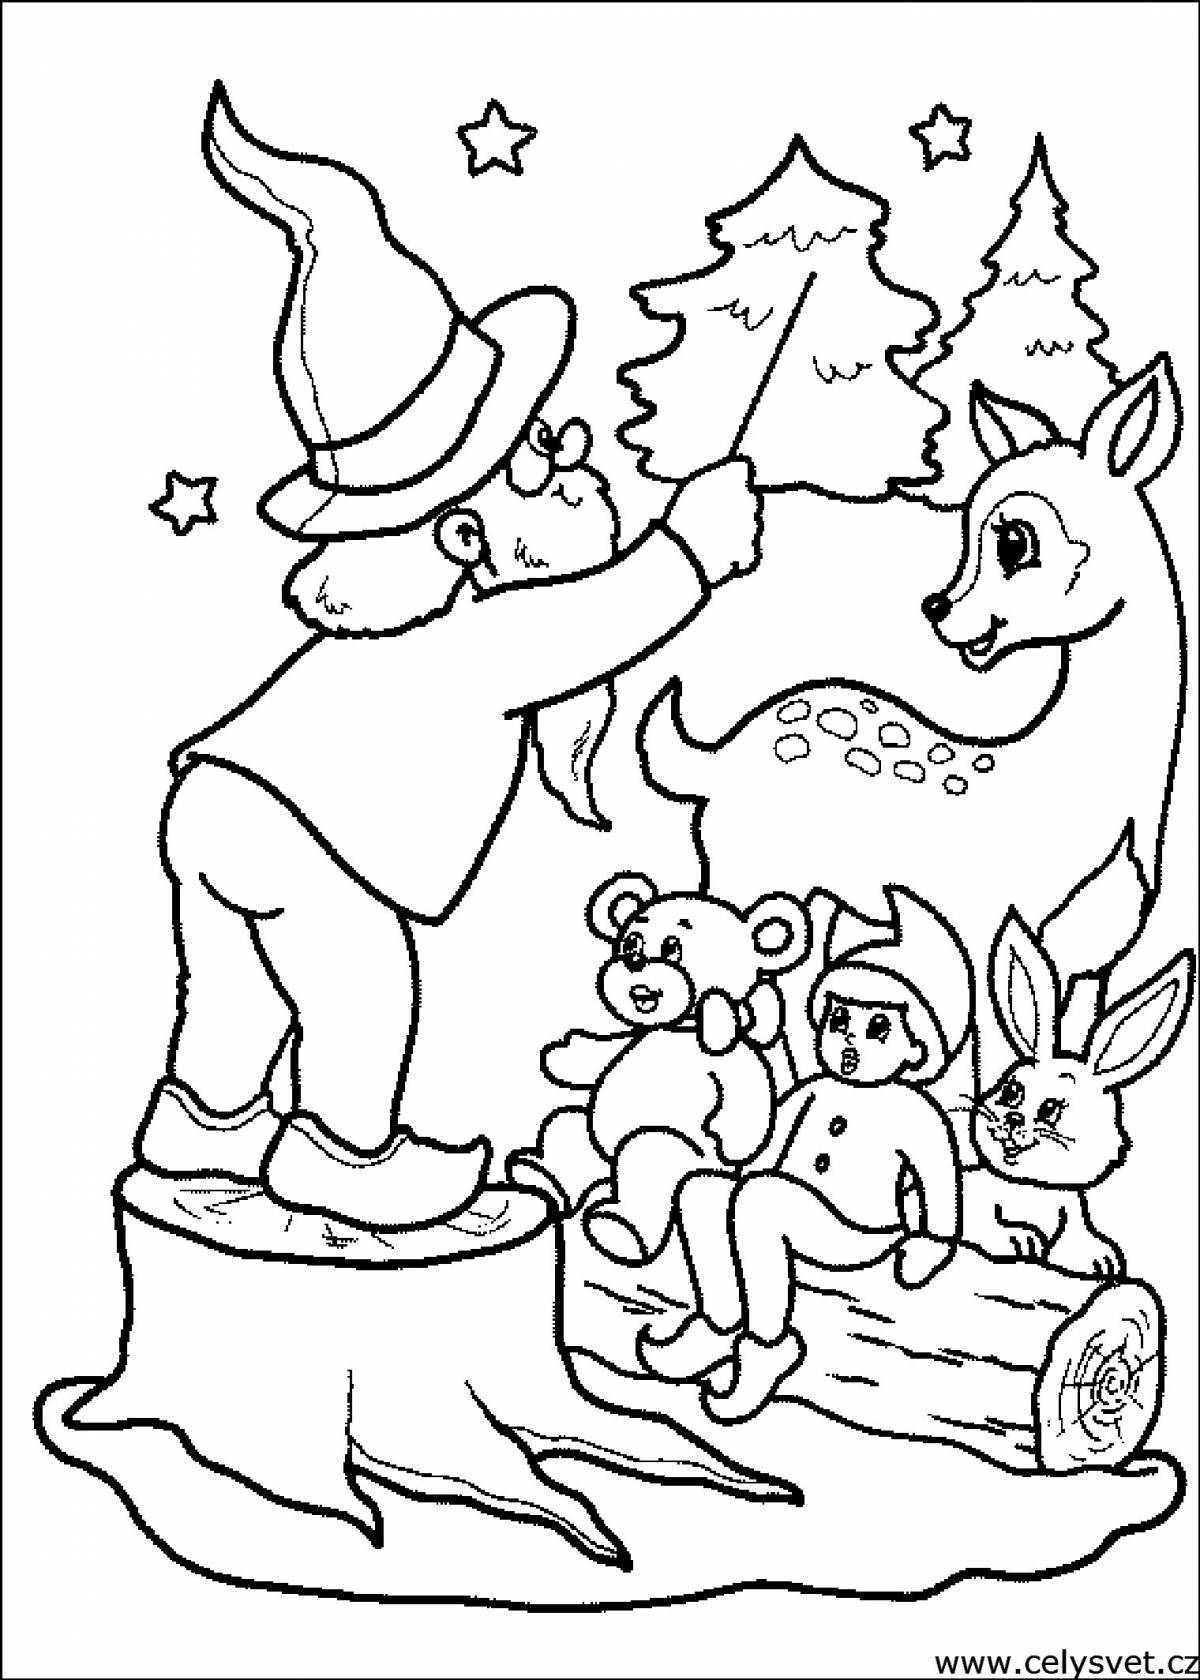 Playful Christmas story coloring page